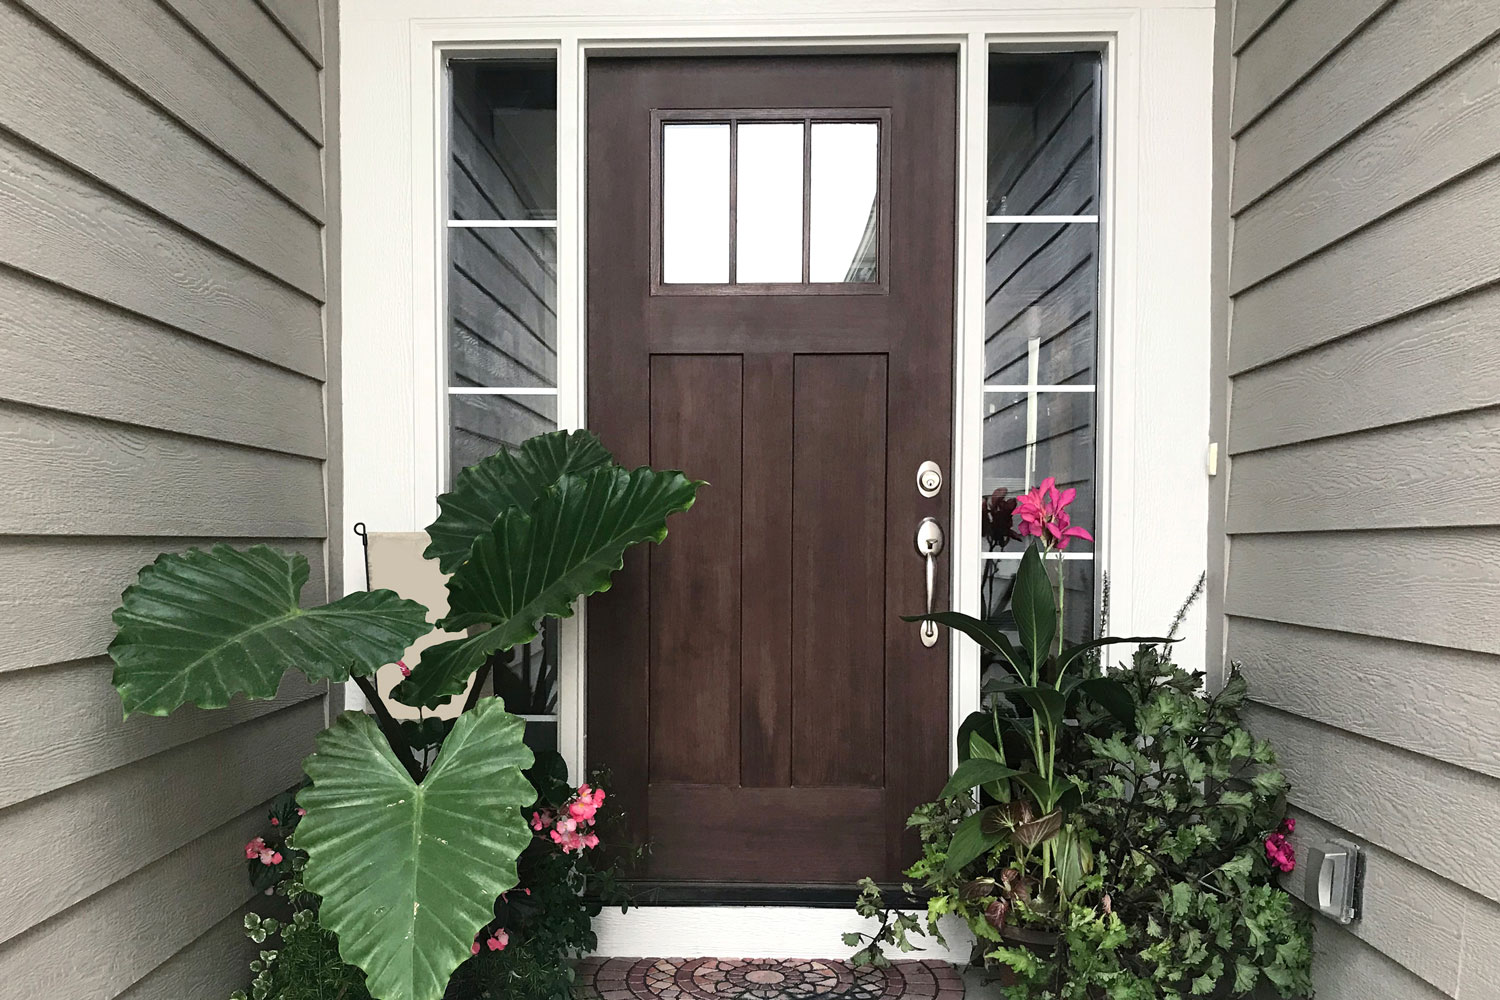 A brown fron door with white painted trims and plants on the sides for decoration